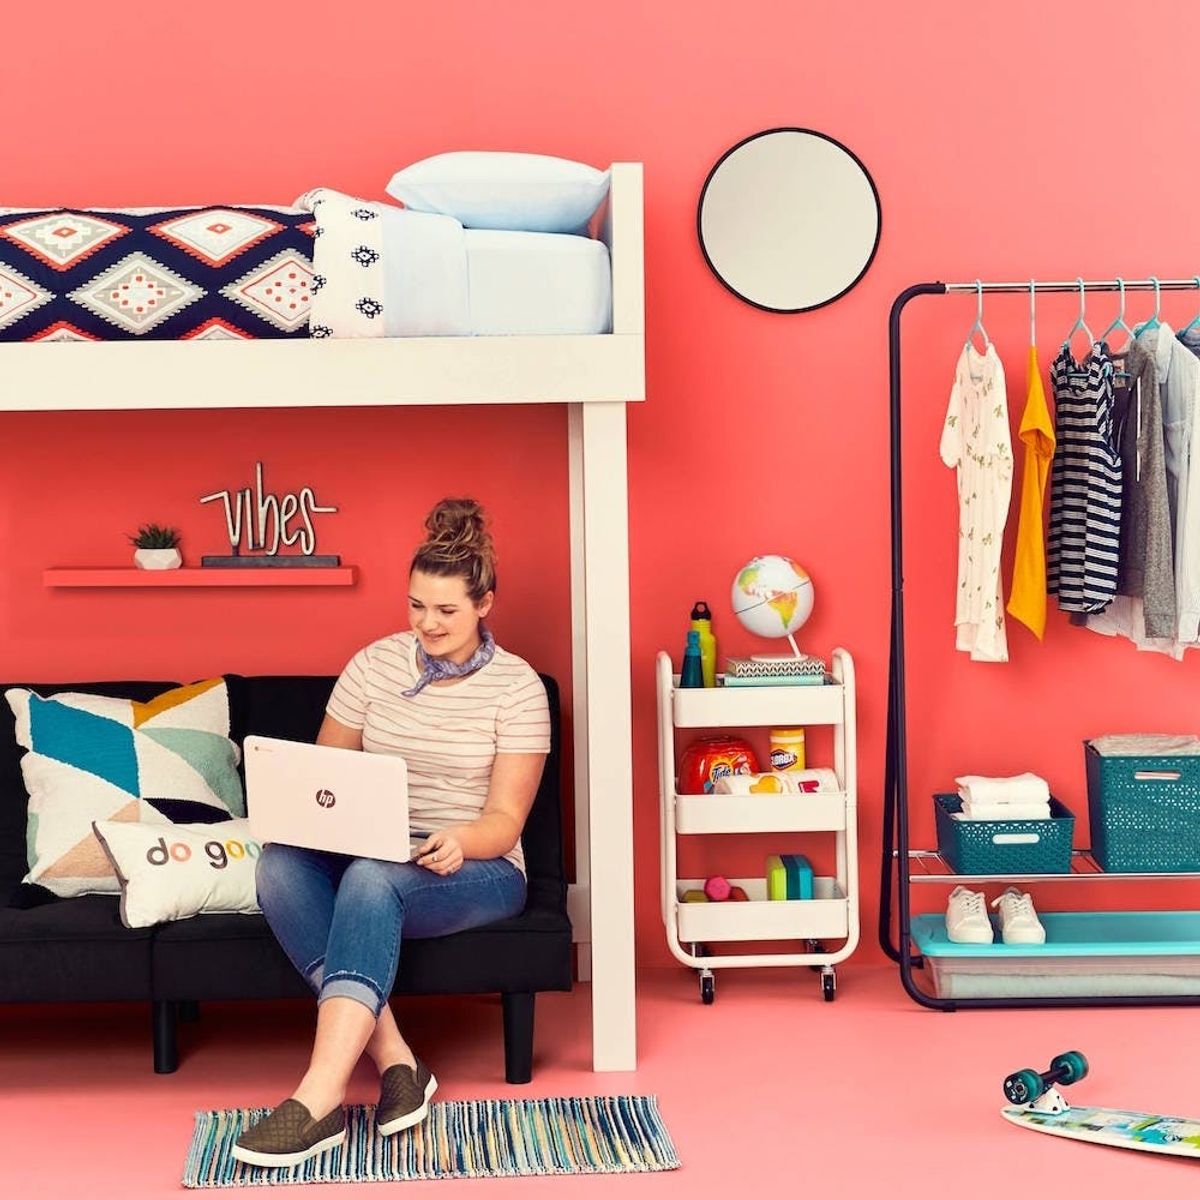 28 Back-to-School Dorm Room Decor Essentials from Target That Get an A+